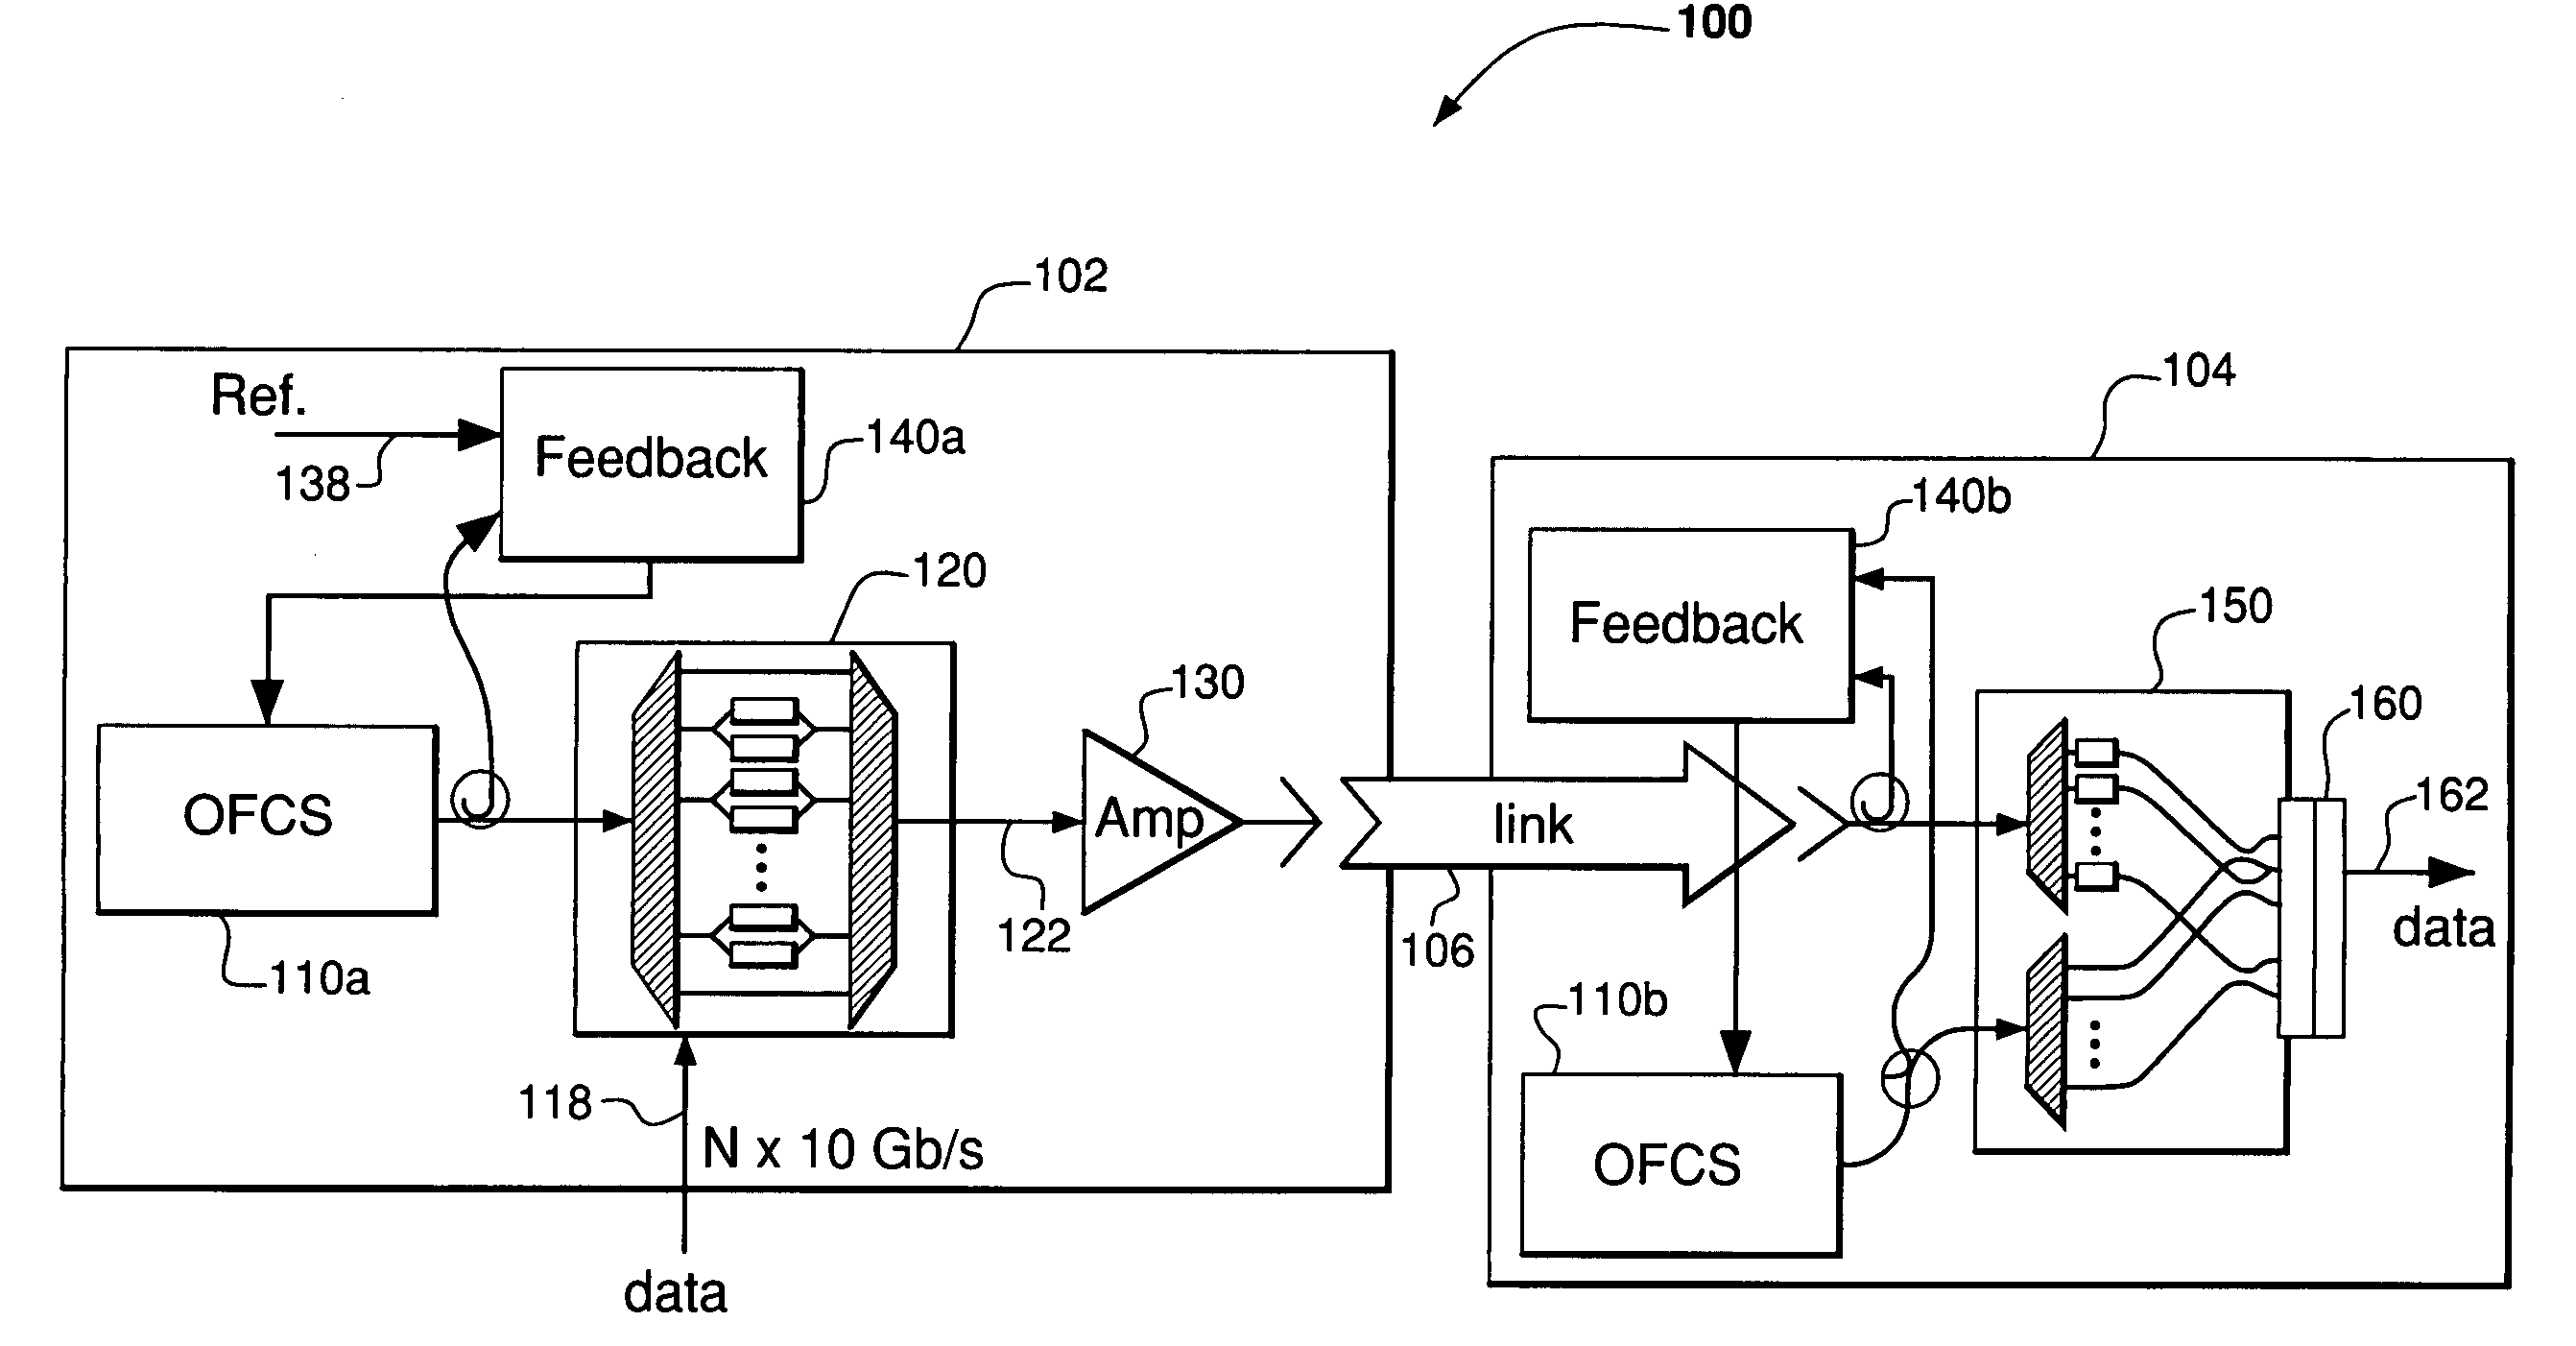 Use of beacons in a WDM communication system